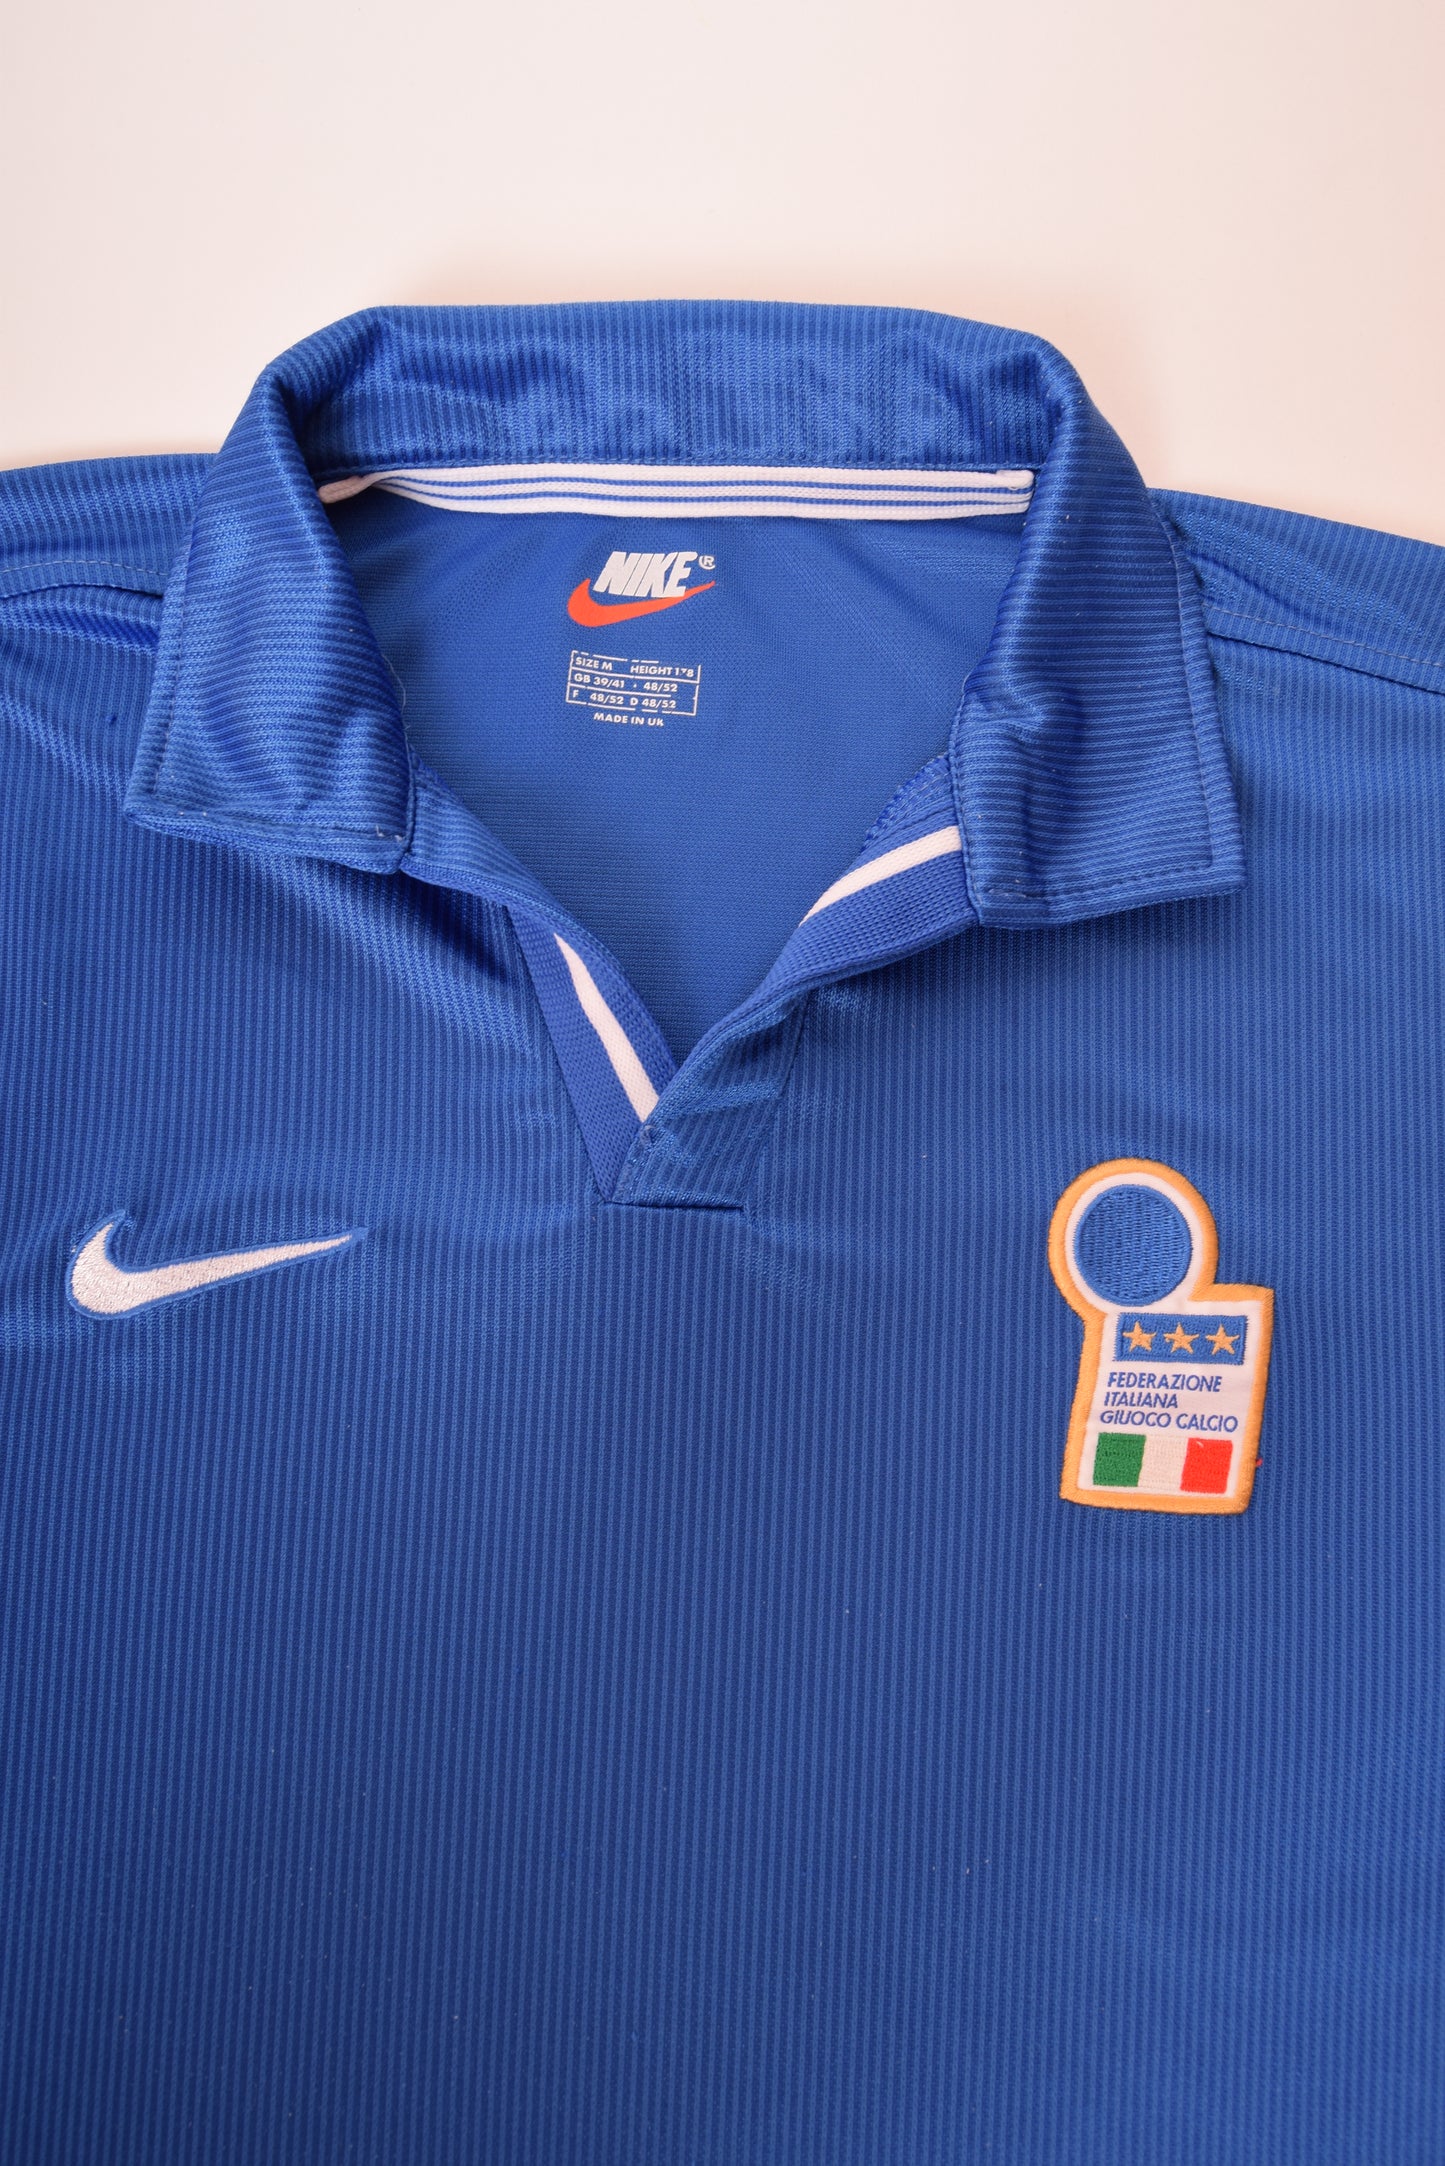 Vintage Italy Italia Nike Home Football Shirt 1998 France World Cup Size M Blue Made in UK